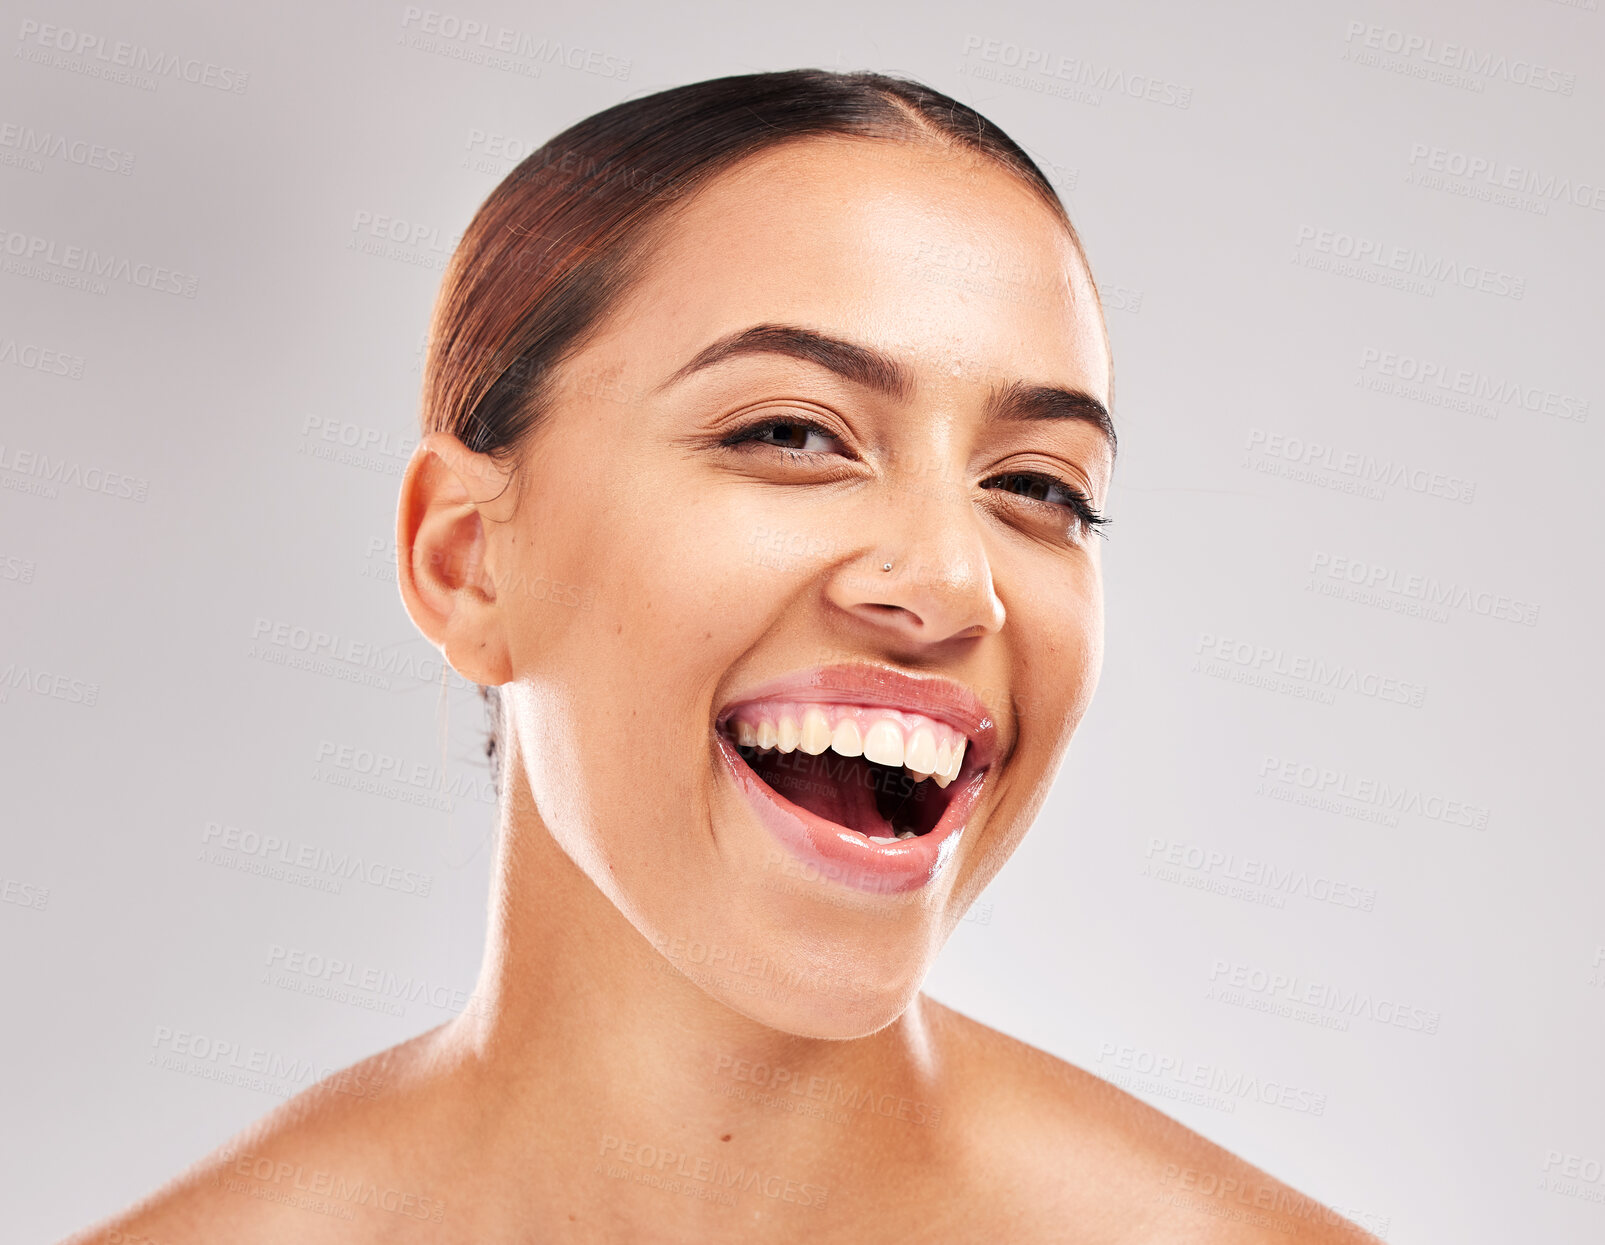 Buy stock photo Woman, face and smile with teeth for dental care, hygiene or skincare against grey studio background. Portrait of happy female smiling in satisfaction for oral cosmetics, mouth or gum care treatment